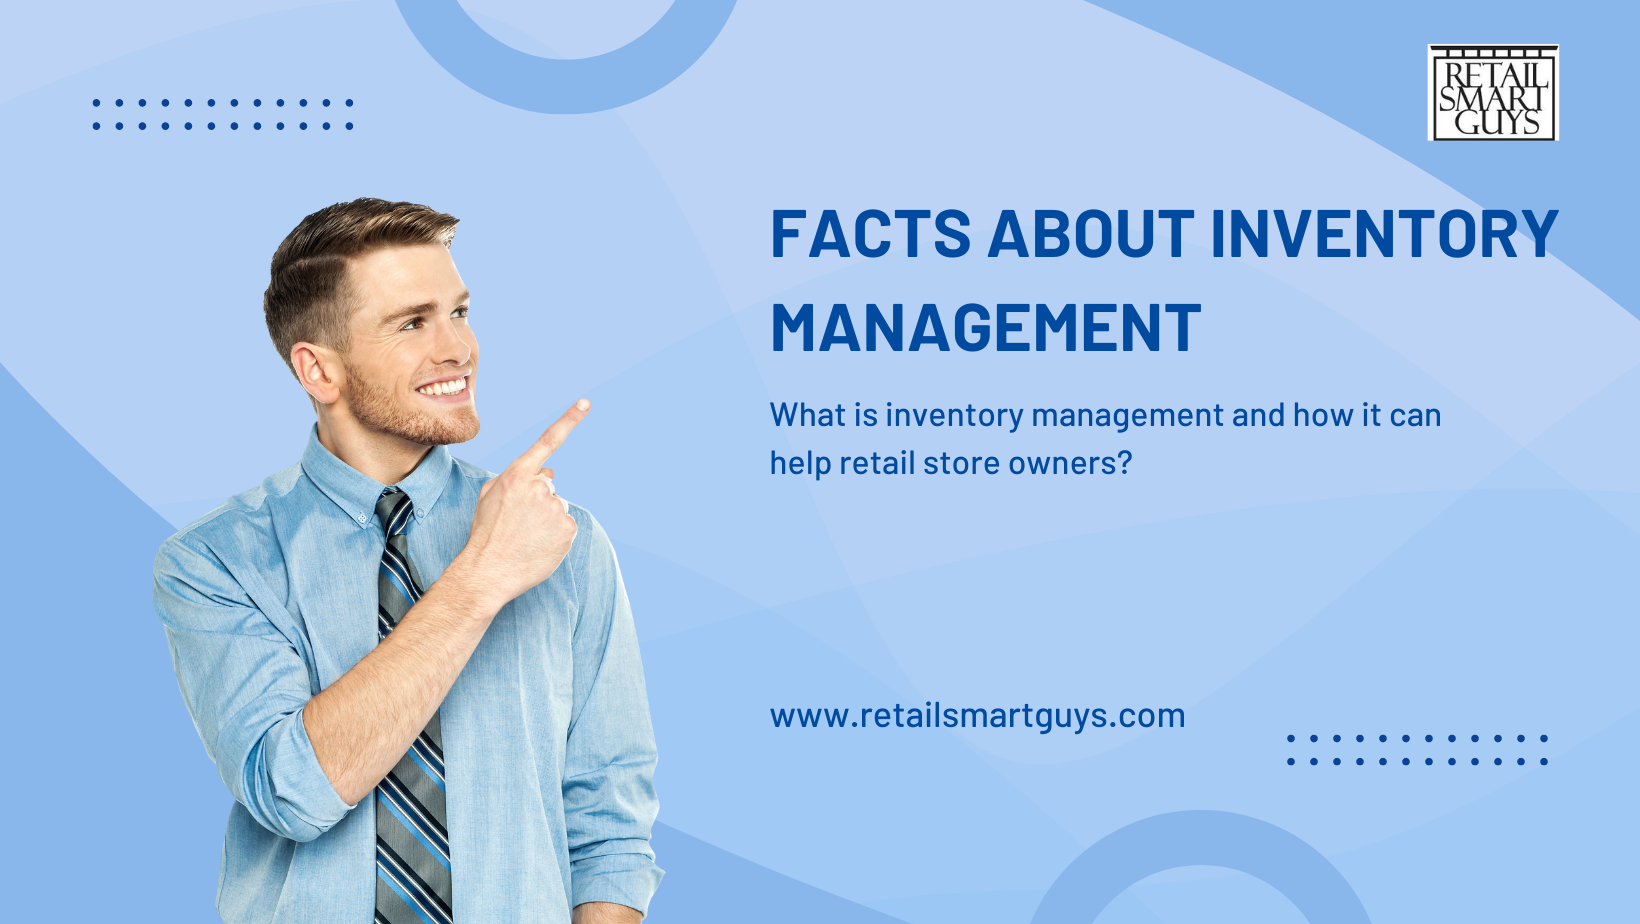 Facts about Inventory Management